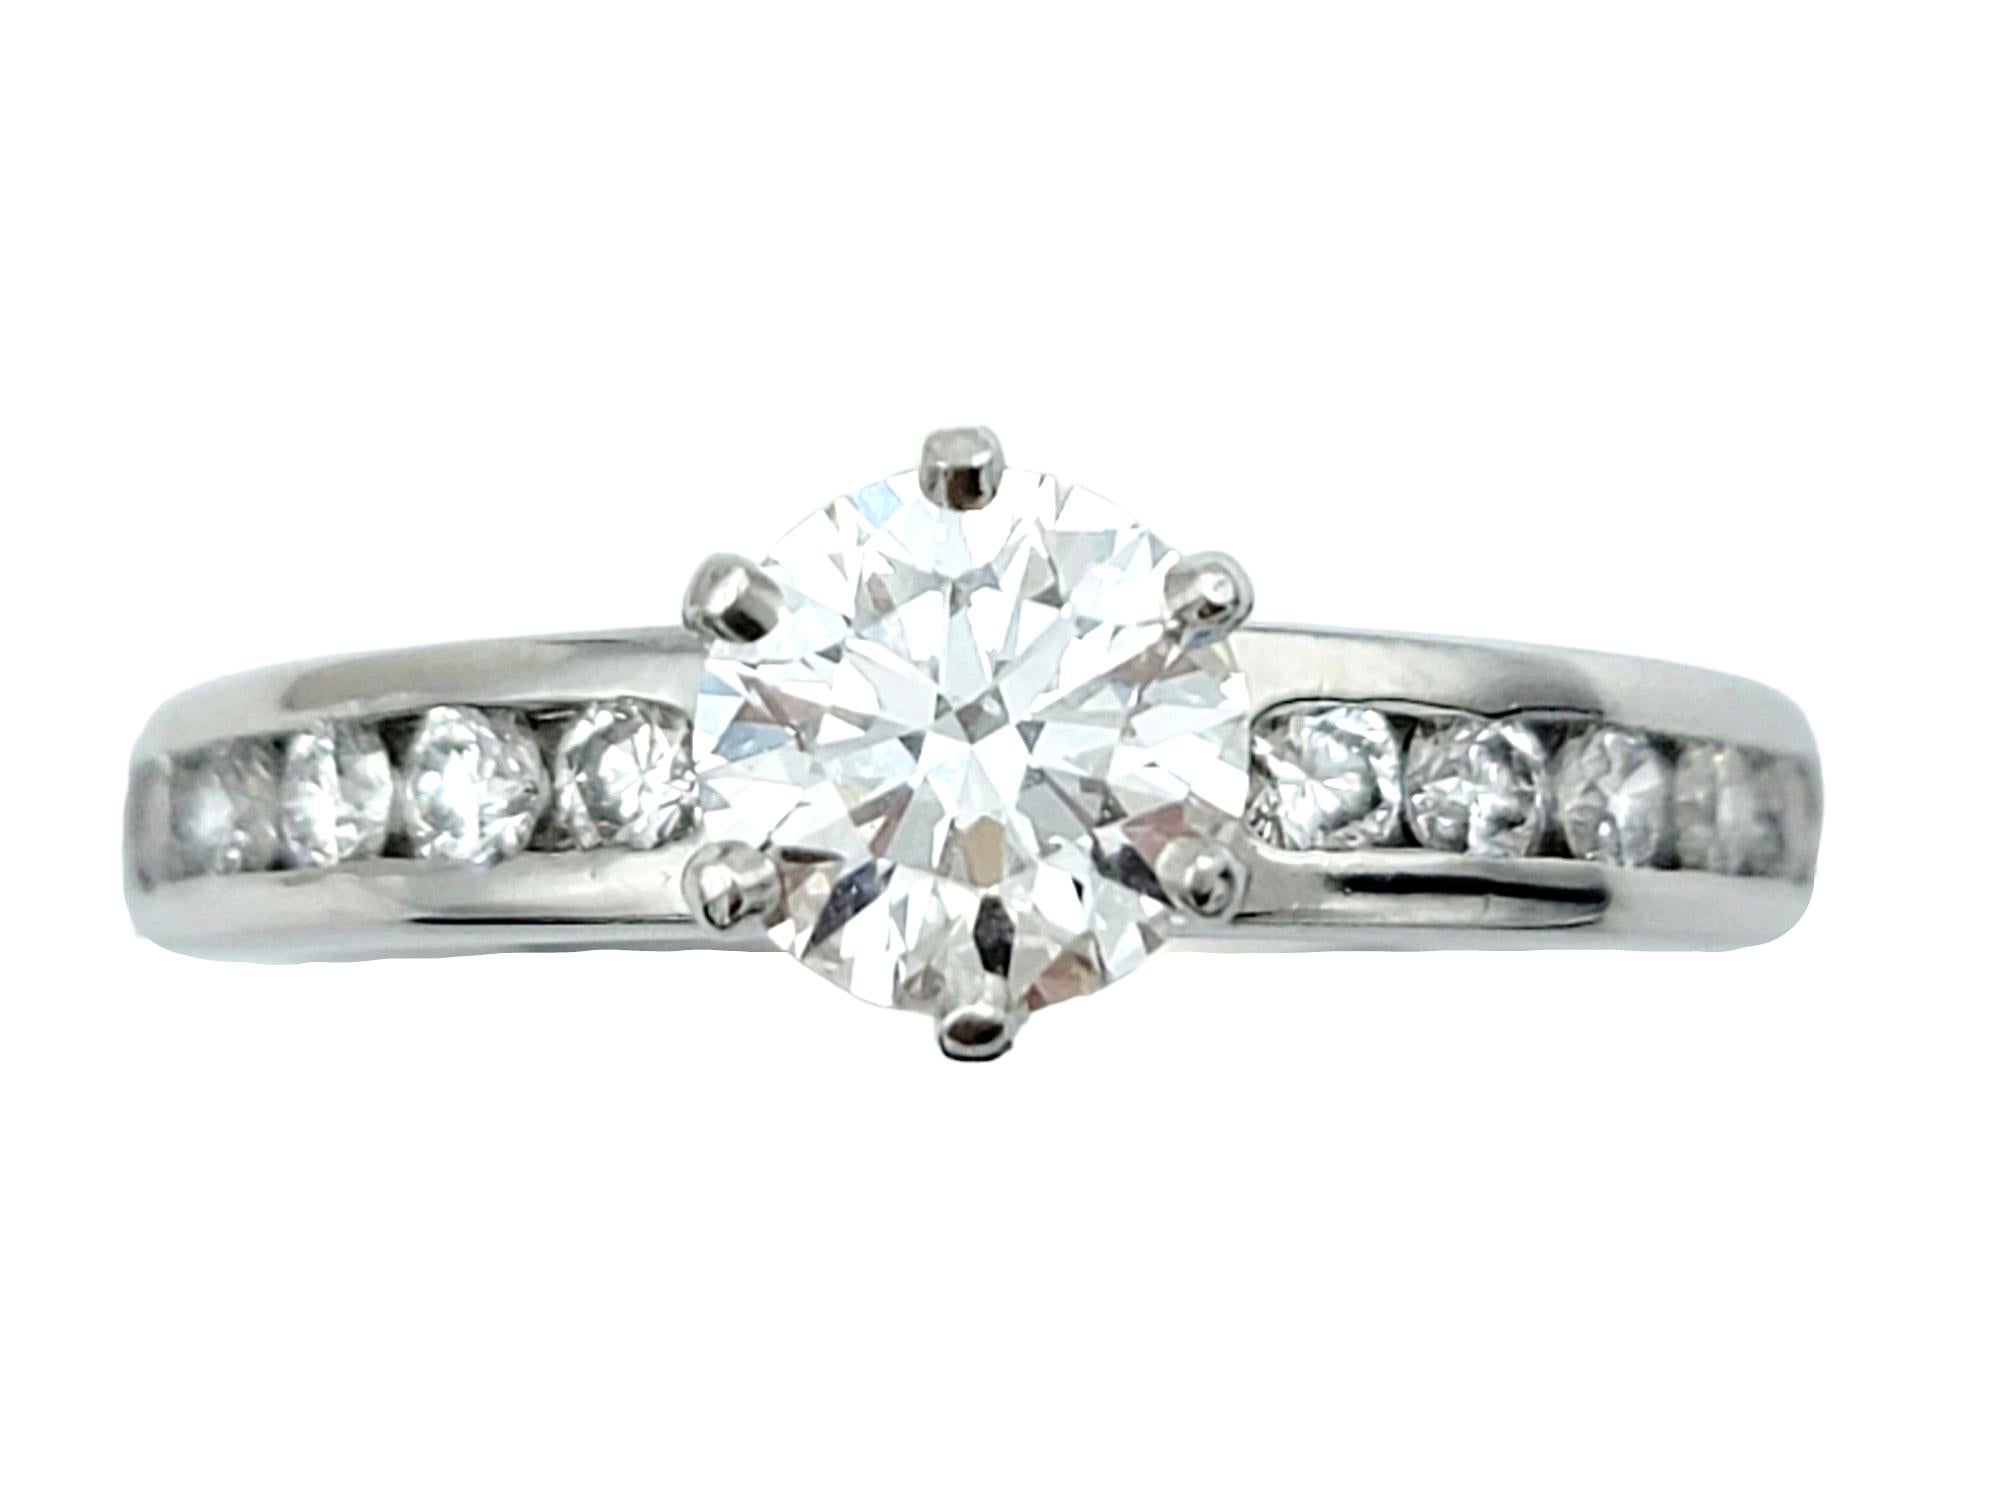 Ring size: 5.75

Say yes to this incredible diamond solitaire engagement ring from Tiffany & Co.! This classic Tiffany engagement ring gets a little modernized update with the addition of glittering diamonds along the shank, adding even more sparkle